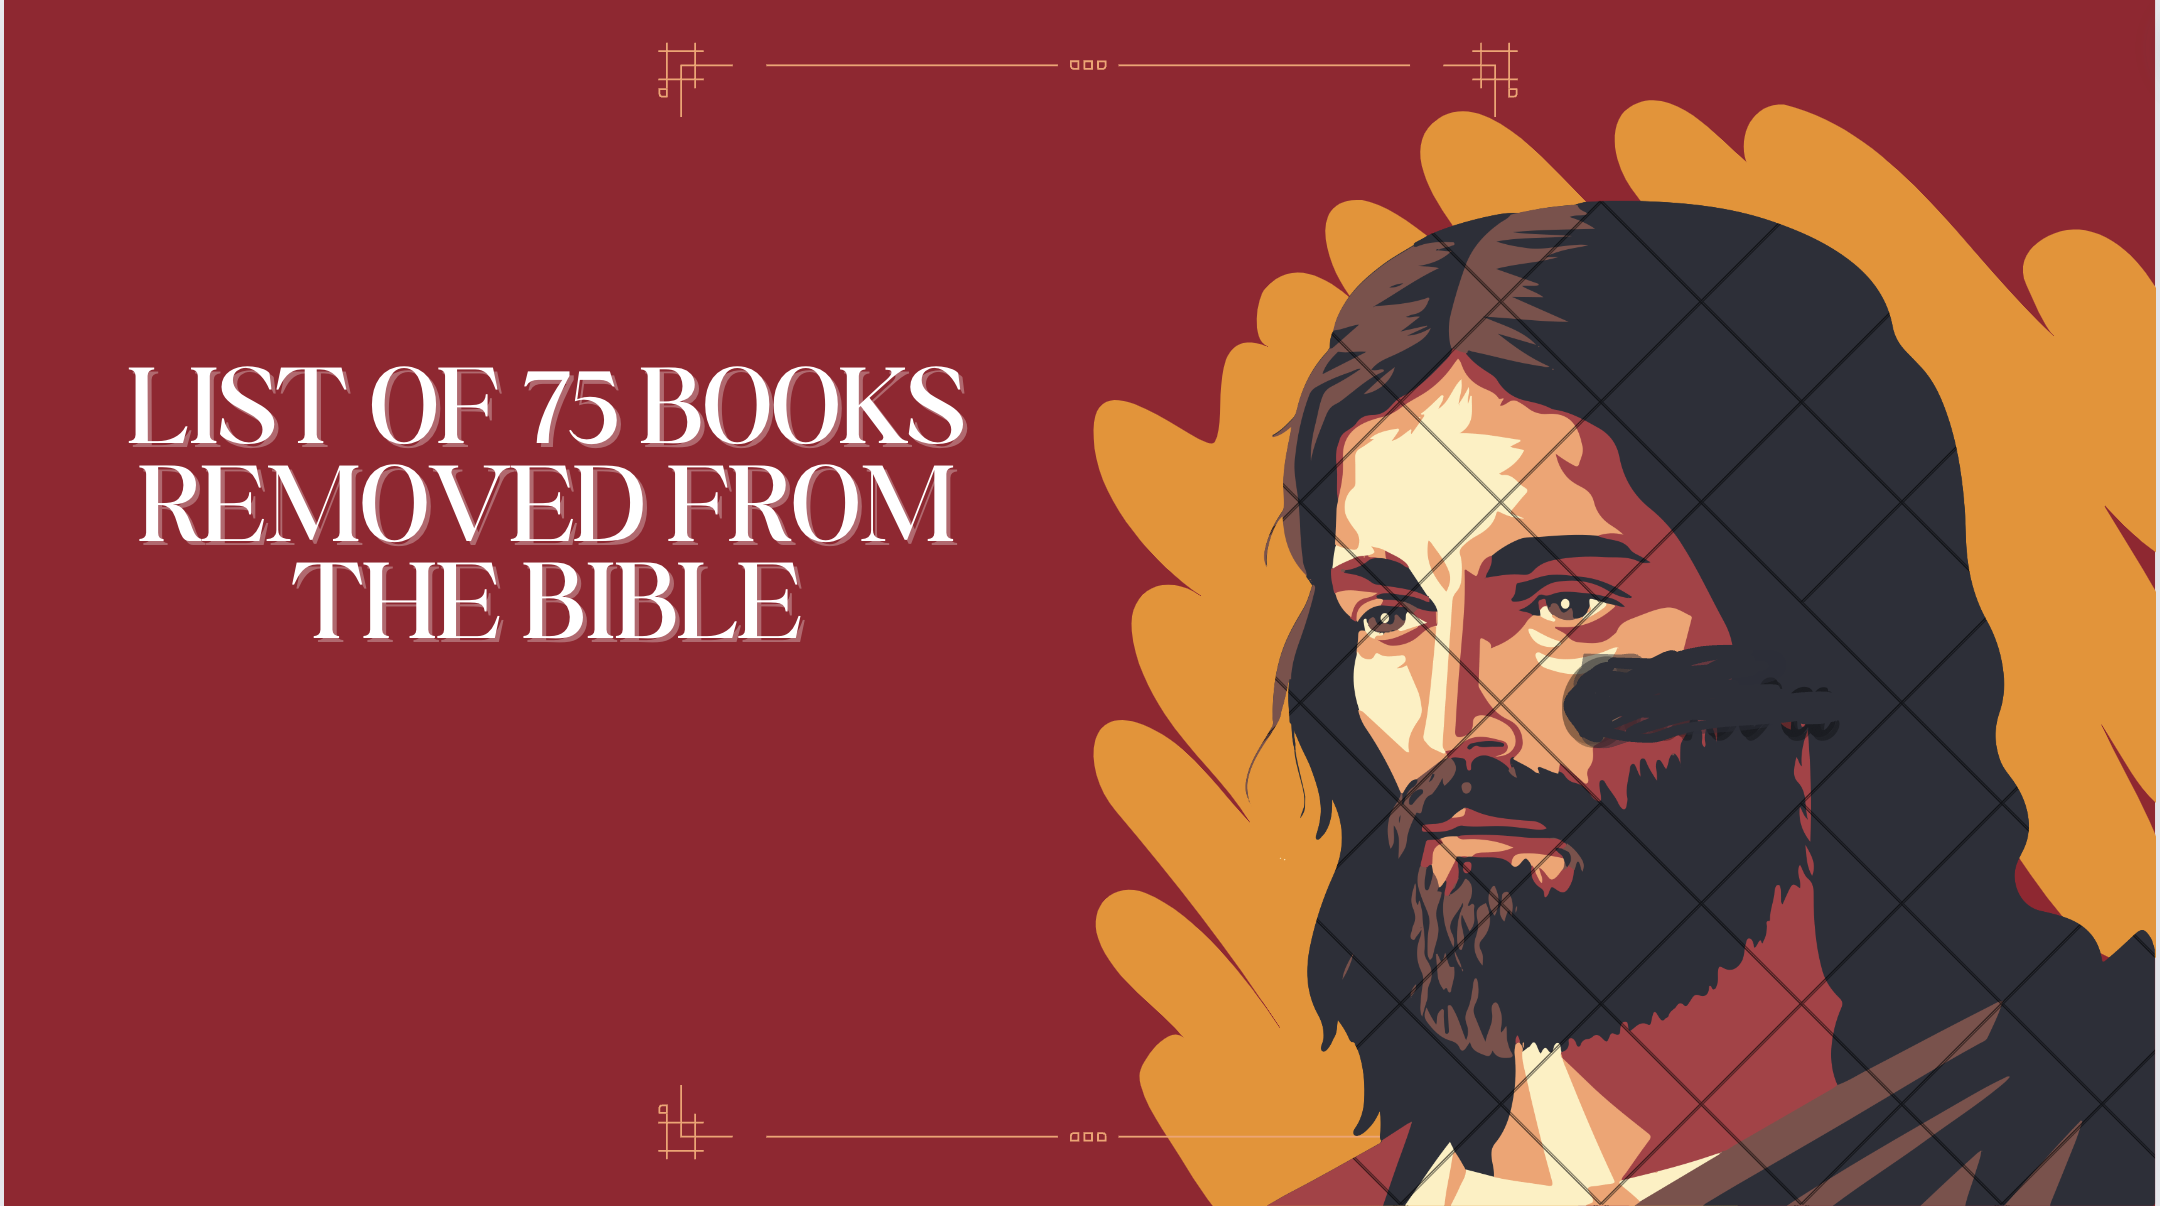 List of 75 Books Removed from the Bible